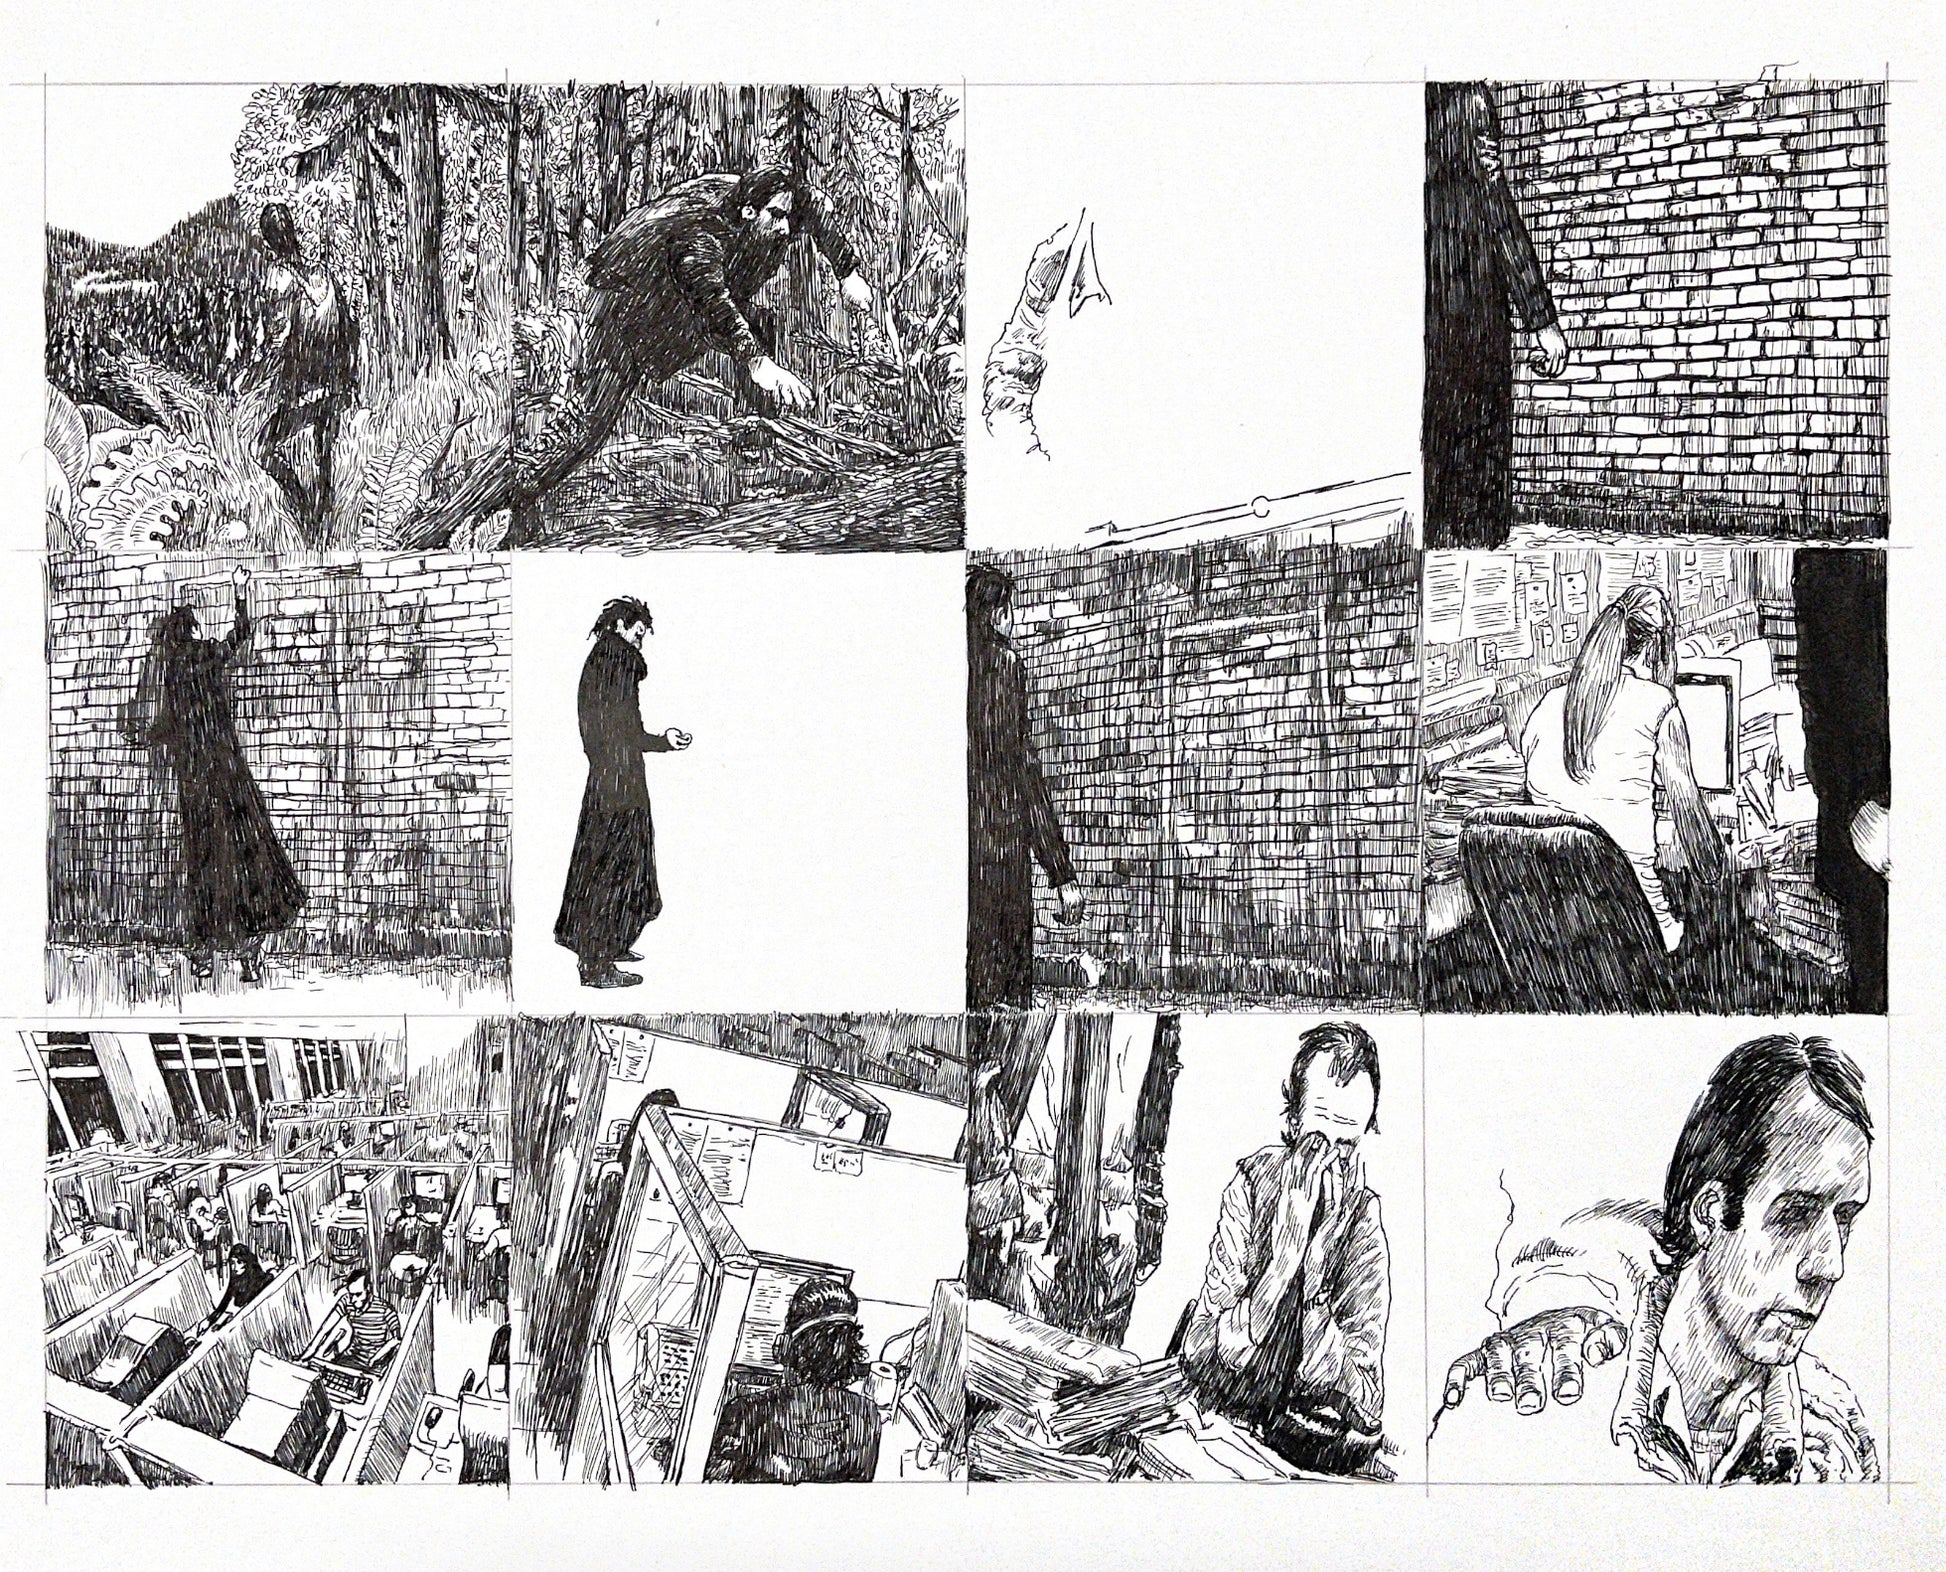 Graphic novel panels, featuring ink drawings, people, brick walls, office spaces and the forest.